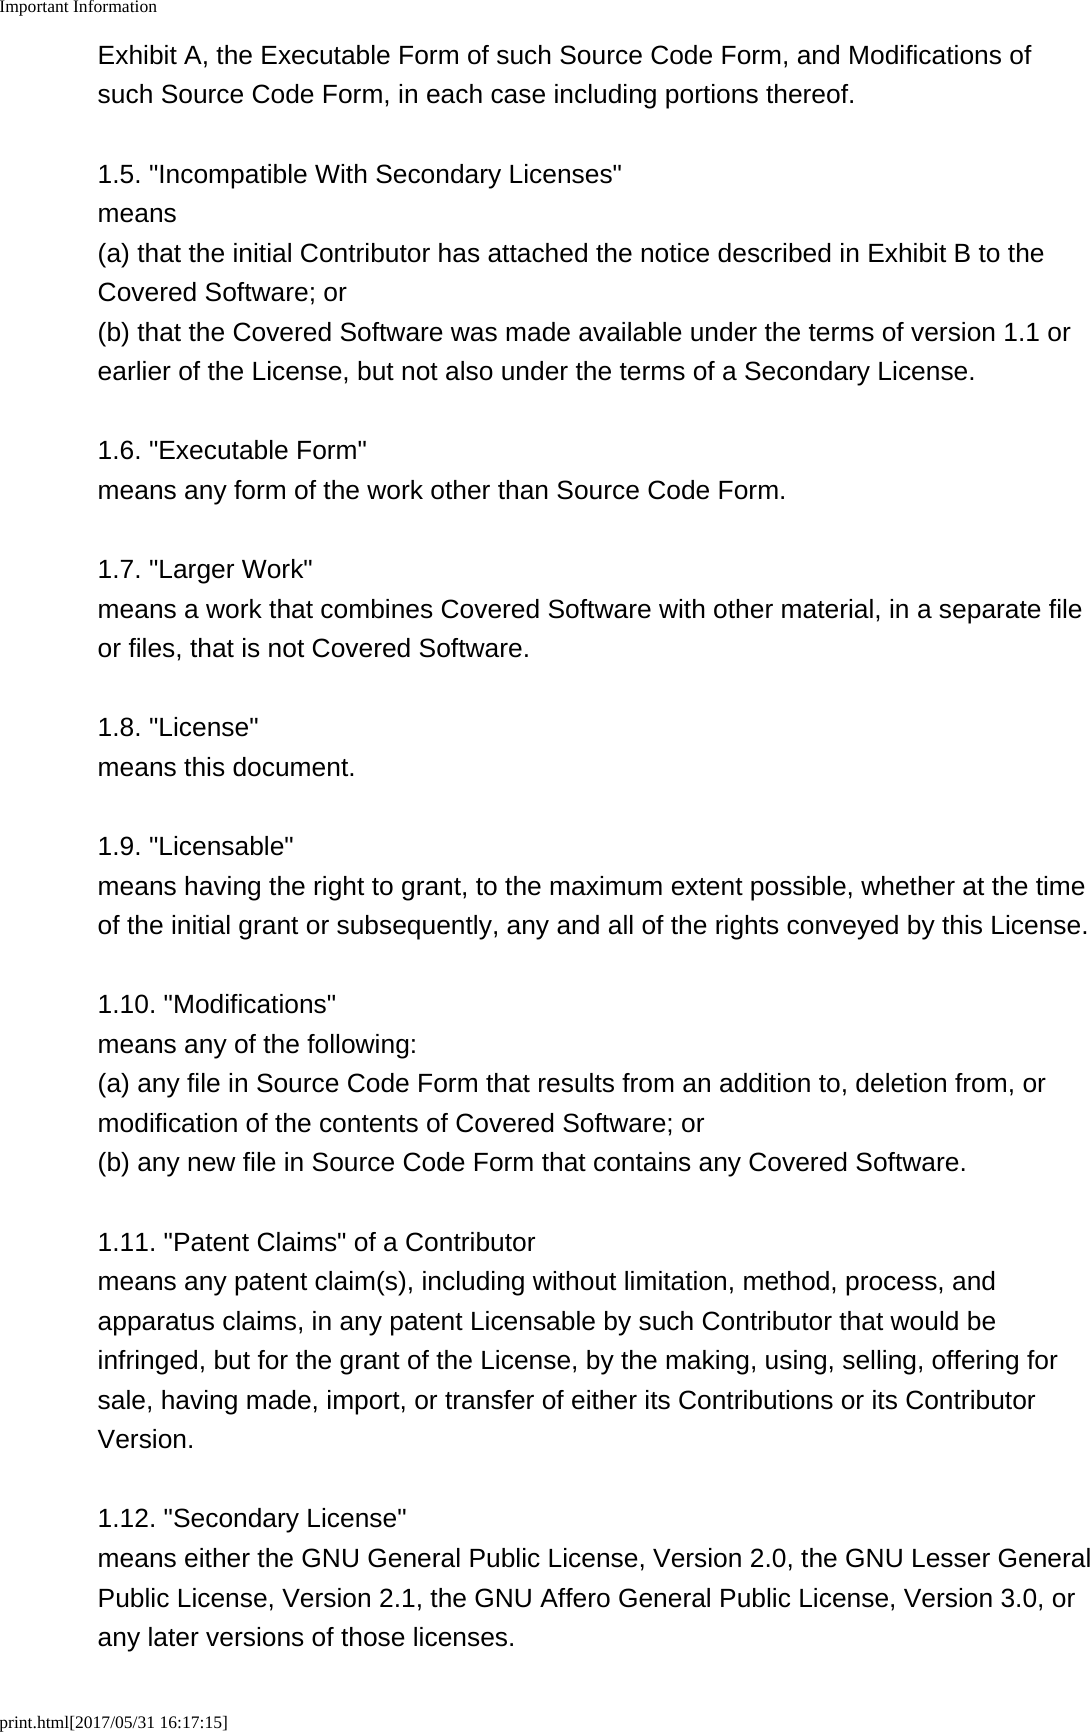 Important Informationprint.html[2017/05/31 16:17:15]Exhibit A, the Executable Form of such Source Code Form, and Modifications ofsuch Source Code Form, in each case including portions thereof.1.5. &quot;Incompatible With Secondary Licenses&quot;means(a) that the initial Contributor has attached the notice described in Exhibit B to theCovered Software; or(b) that the Covered Software was made available under the terms of version 1.1 orearlier of the License, but not also under the terms of a Secondary License.1.6. &quot;Executable Form&quot;means any form of the work other than Source Code Form.1.7. &quot;Larger Work&quot;means a work that combines Covered Software with other material, in a separate fileor files, that is not Covered Software.1.8. &quot;License&quot;means this document.1.9. &quot;Licensable&quot;means having the right to grant, to the maximum extent possible, whether at the timeof the initial grant or subsequently, any and all of the rights conveyed by this License.1.10. &quot;Modifications&quot;means any of the following:(a) any file in Source Code Form that results from an addition to, deletion from, ormodification of the contents of Covered Software; or(b) any new file in Source Code Form that contains any Covered Software.1.11. &quot;Patent Claims&quot; of a Contributormeans any patent claim(s), including without limitation, method, process, andapparatus claims, in any patent Licensable by such Contributor that would beinfringed, but for the grant of the License, by the making, using, selling, offering forsale, having made, import, or transfer of either its Contributions or its ContributorVersion.1.12. &quot;Secondary License&quot;means either the GNU General Public License, Version 2.0, the GNU Lesser GeneralPublic License, Version 2.1, the GNU Affero General Public License, Version 3.0, orany later versions of those licenses.